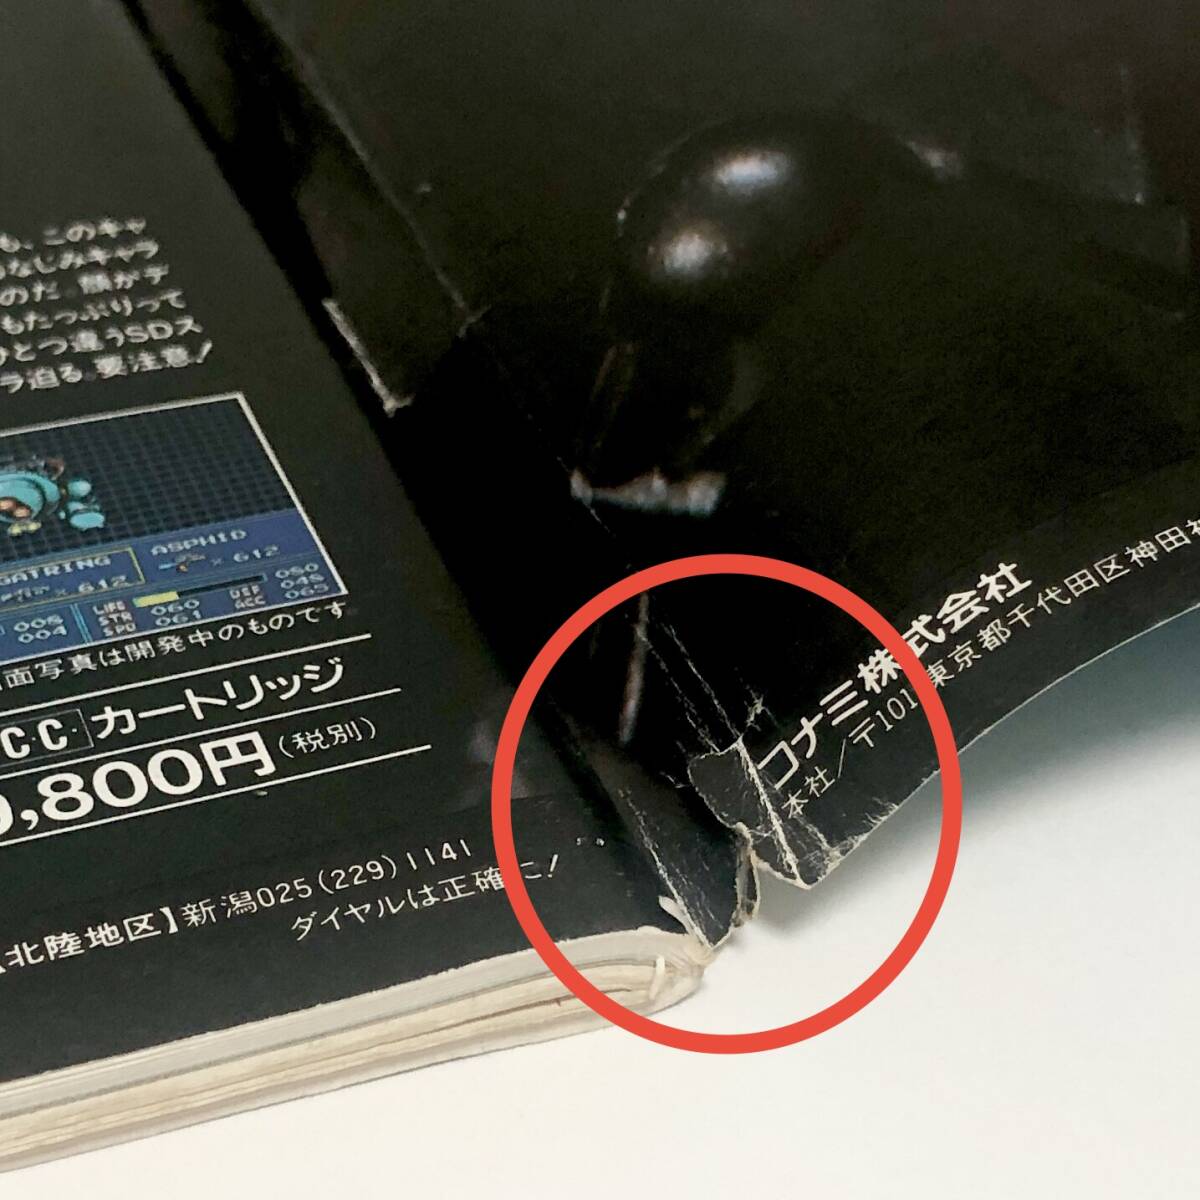  used magazine monthly MSX FAN 1990 year 1 month number appendix none pain equipped [ New Year (Spring) extra-large number ][ Space man bo-..] 1990 January MSX FAN Magazine